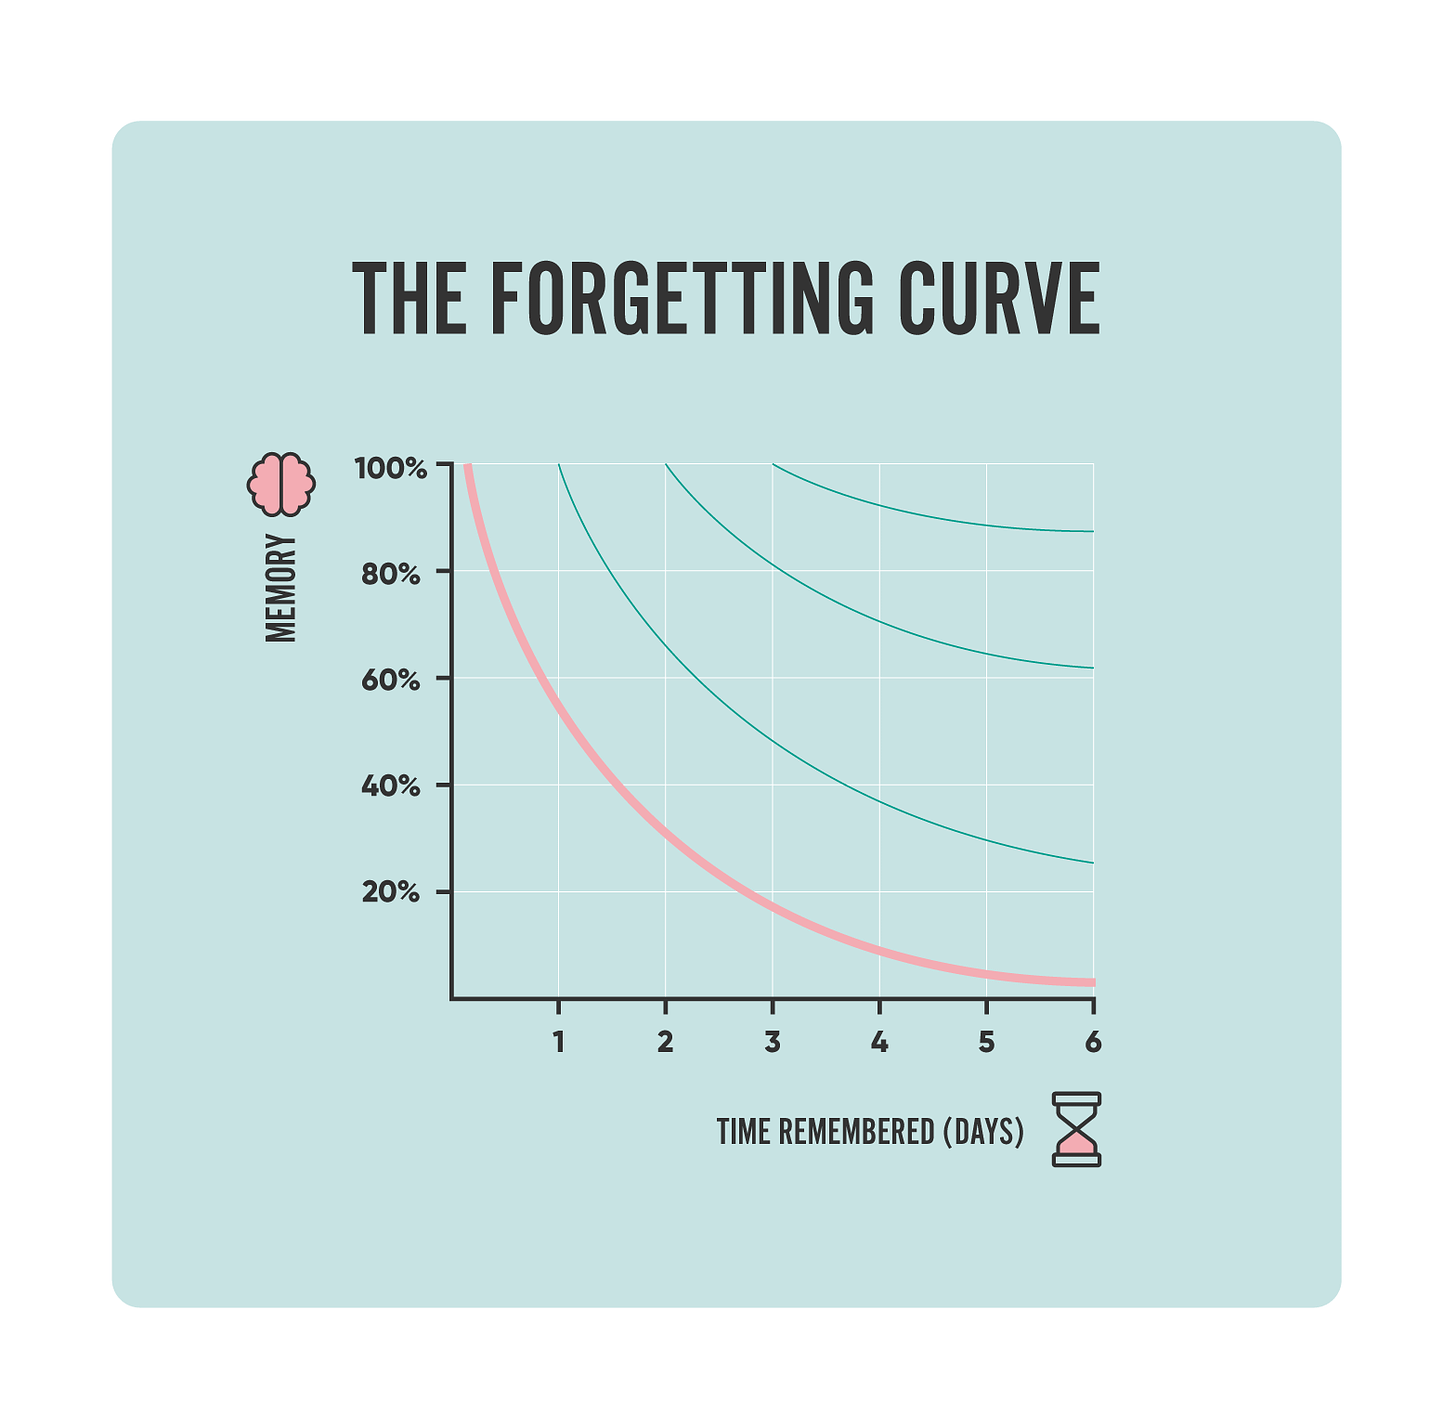 The Forgetting Curve: 5 Ways to Challenge it - LearnUpon